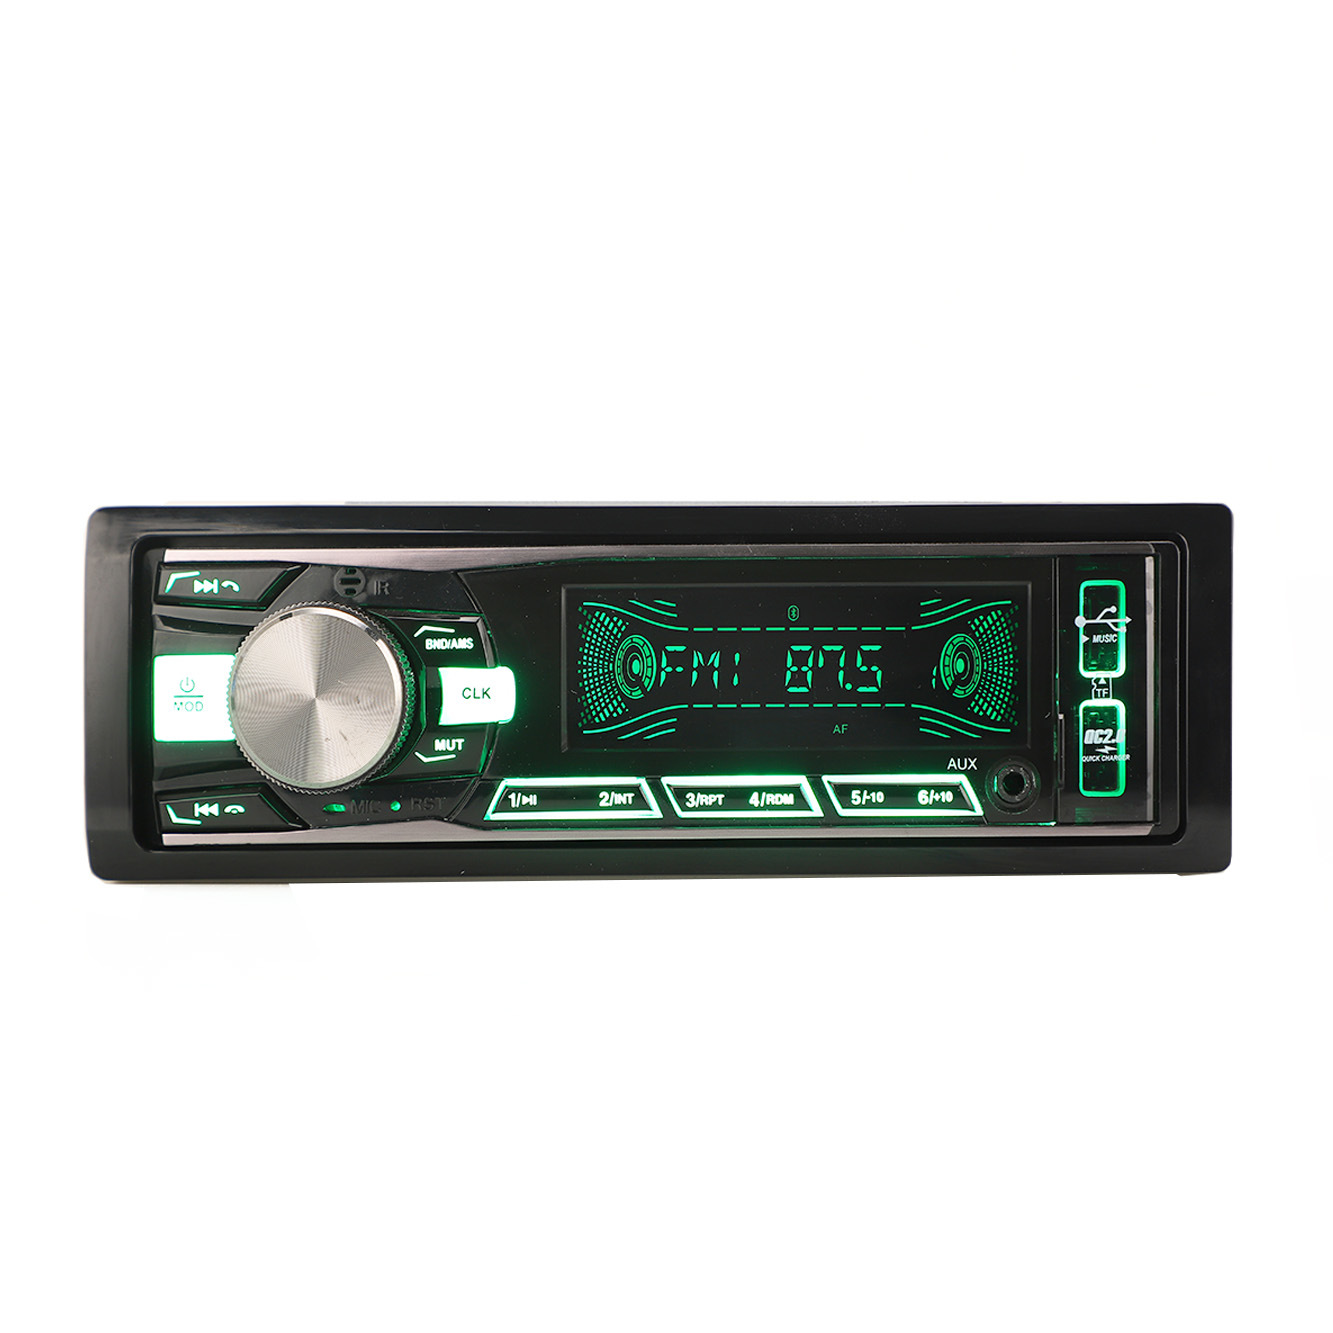 Auto Audio Fixed Panel MP3 Player FM Transmitter Audio Car Stereo Car Audio Car Accessories Single DIN Car Player